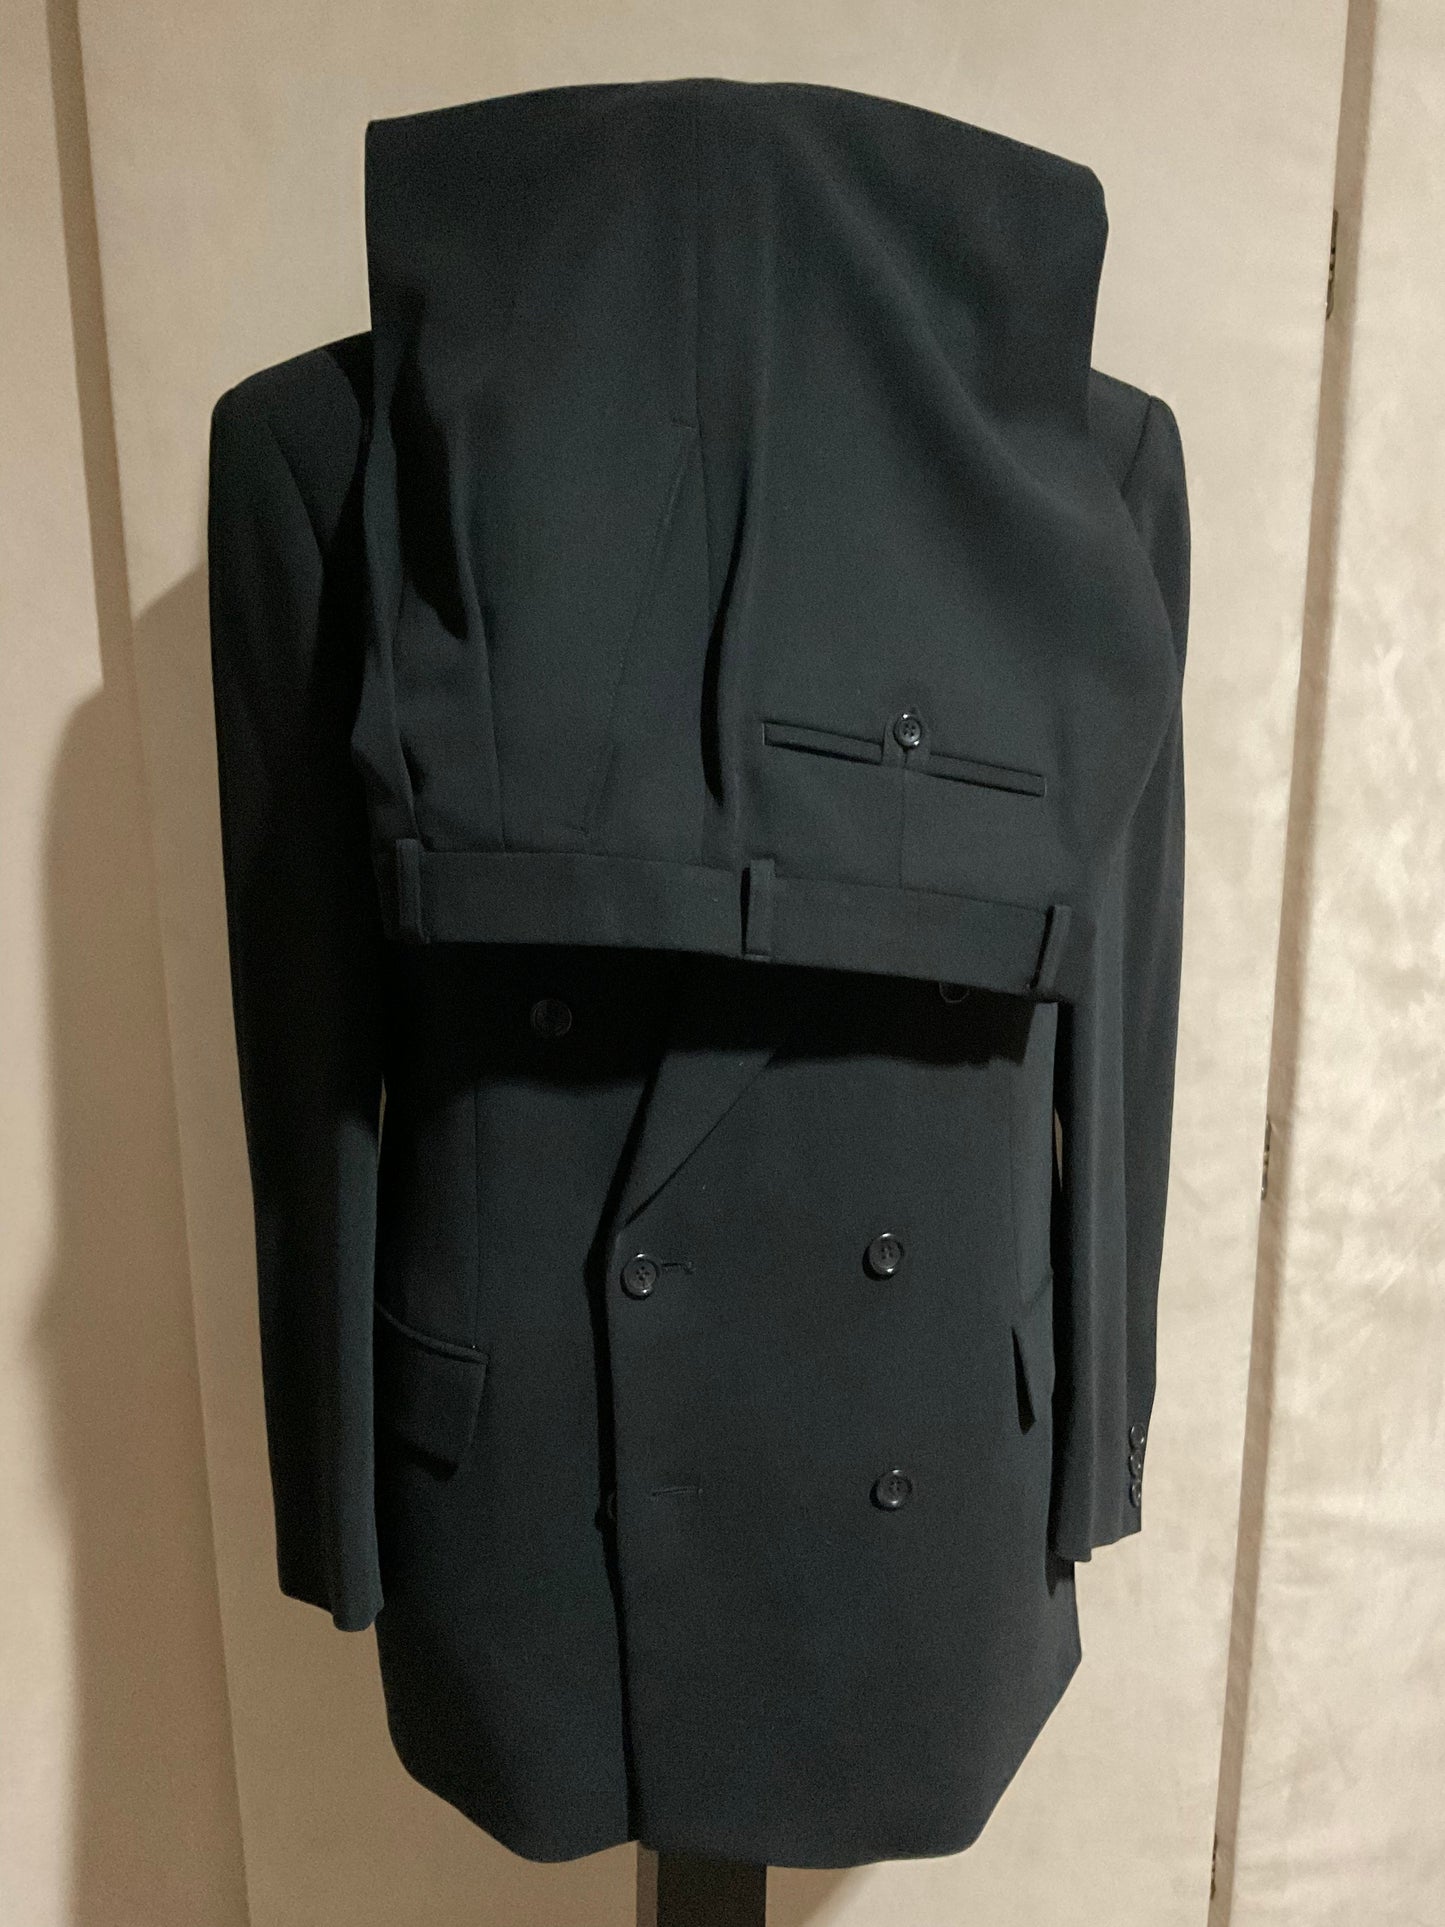 R P SUIT / DOUBLE BREASTED / BLACK CREPE / 40 REG OR LONG / MADE IN EUROPE